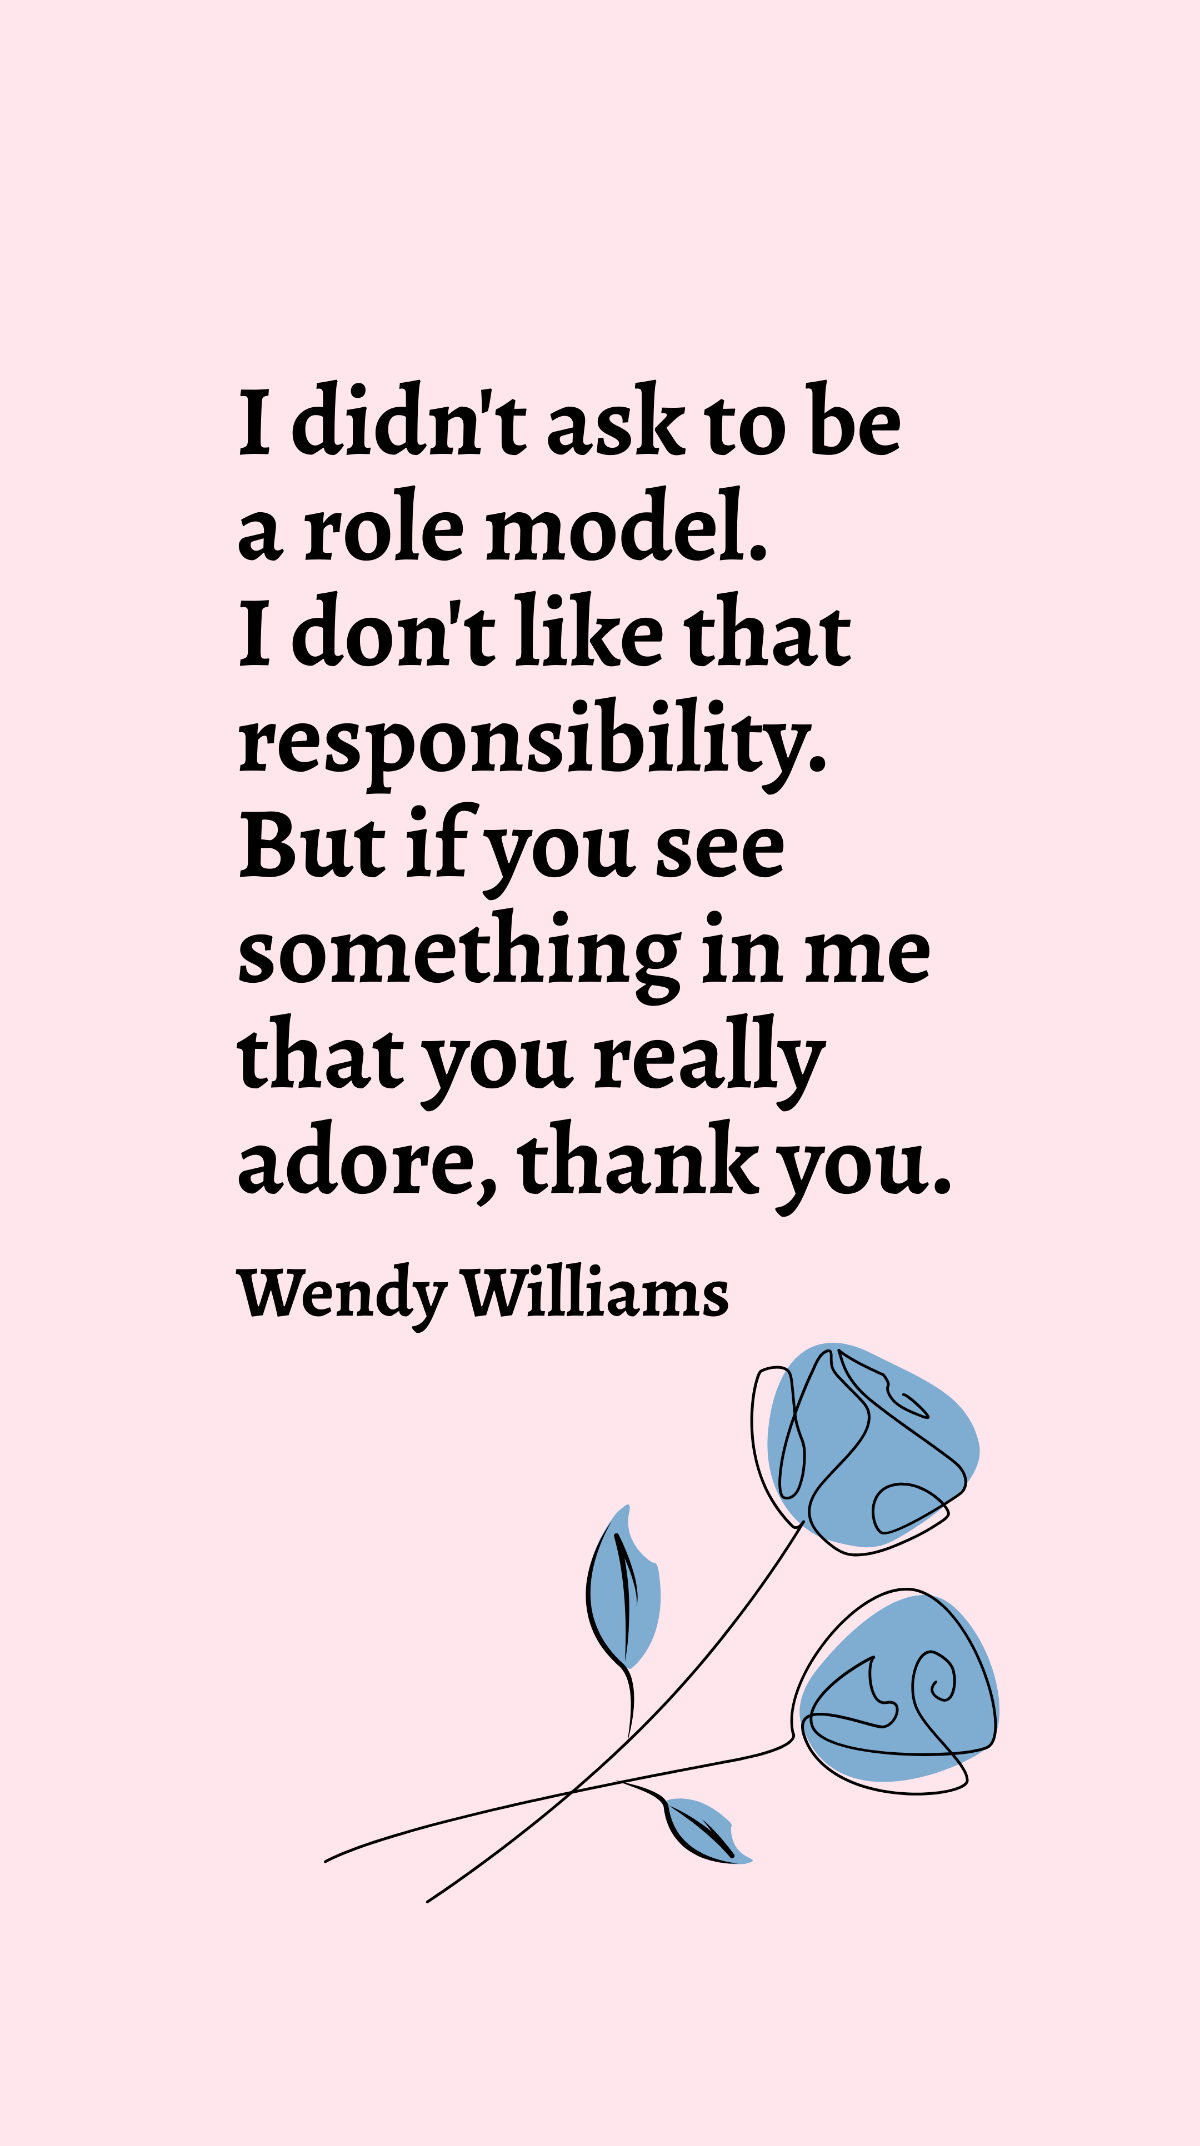 Free Wendy Williams - I didn't ask to be a role model. I don't like that responsibility. But if you see something in me that you really adore, thank you. Template